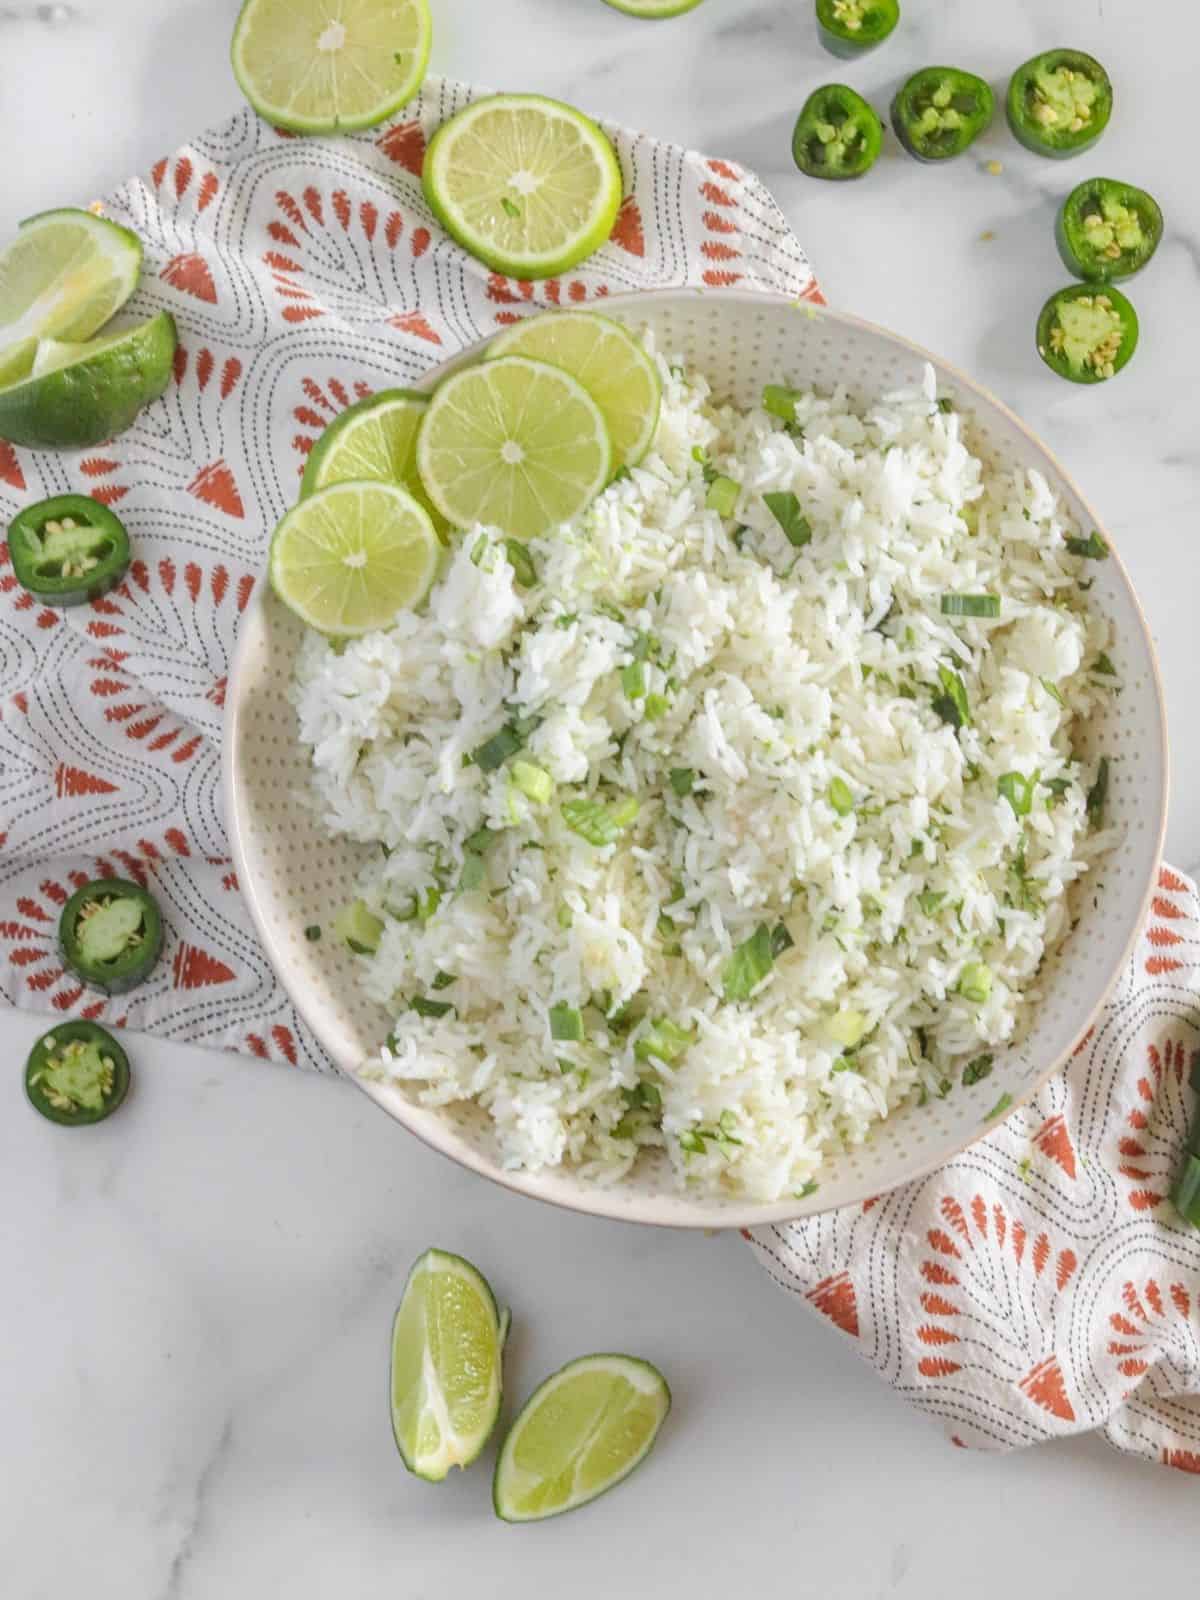 Fluffy white rice and limes